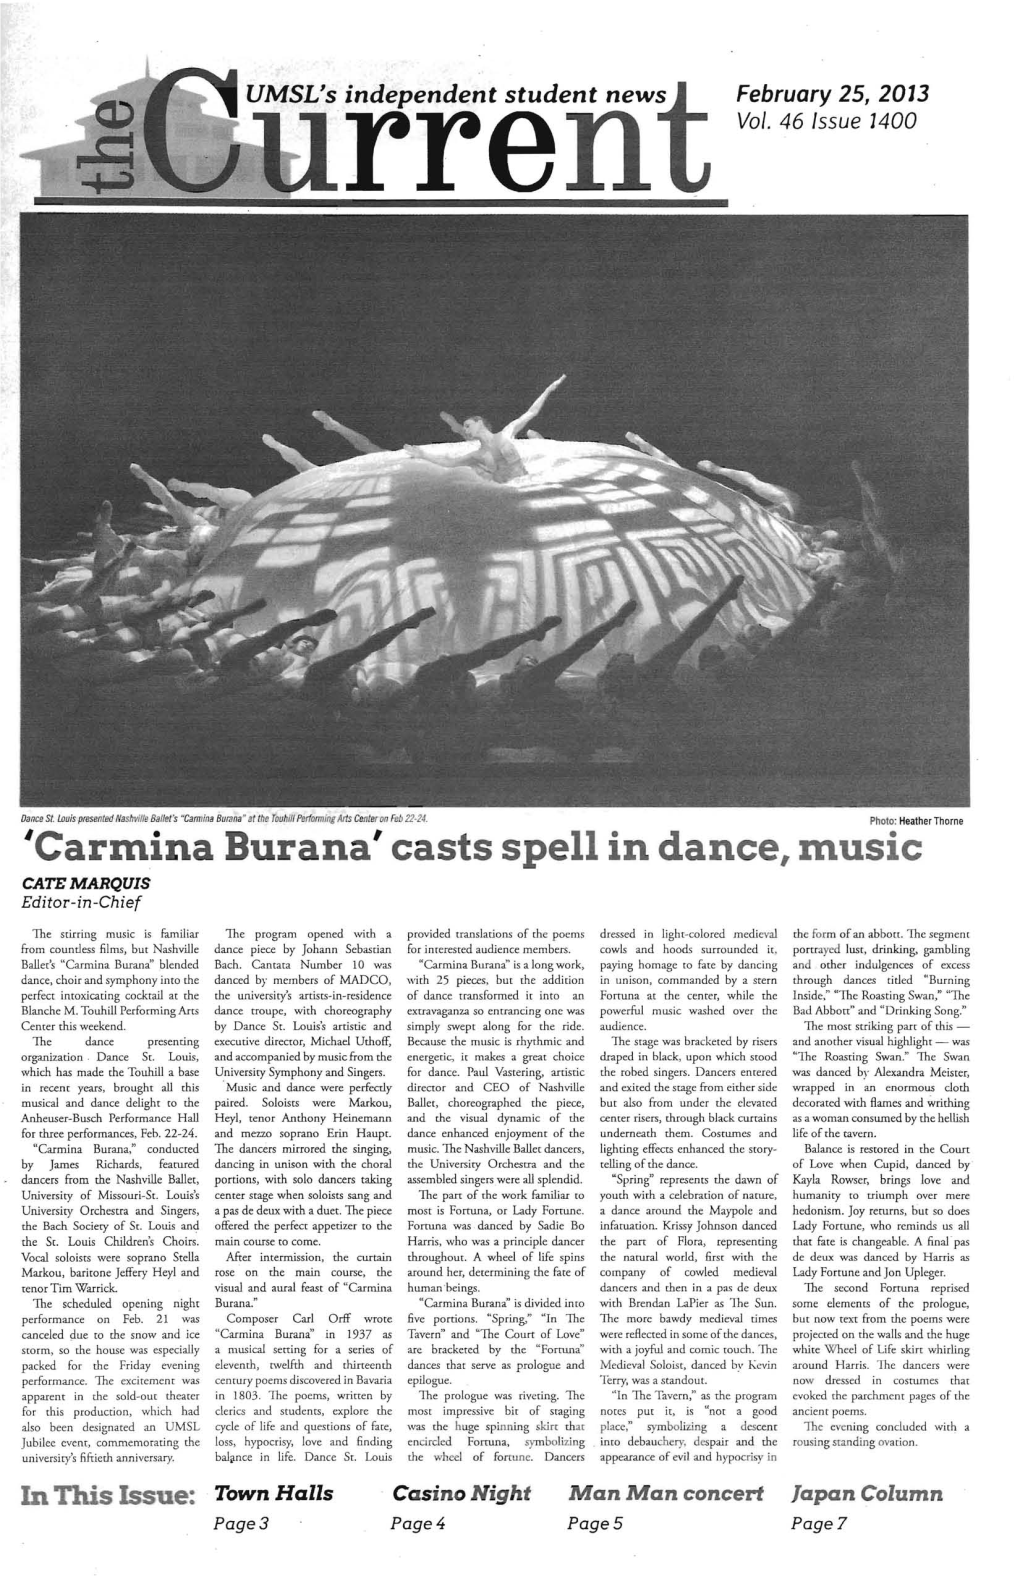 Carmina Burana' Casts Spell in Dance, Music CATE MARQUIS Editor-In-Chief